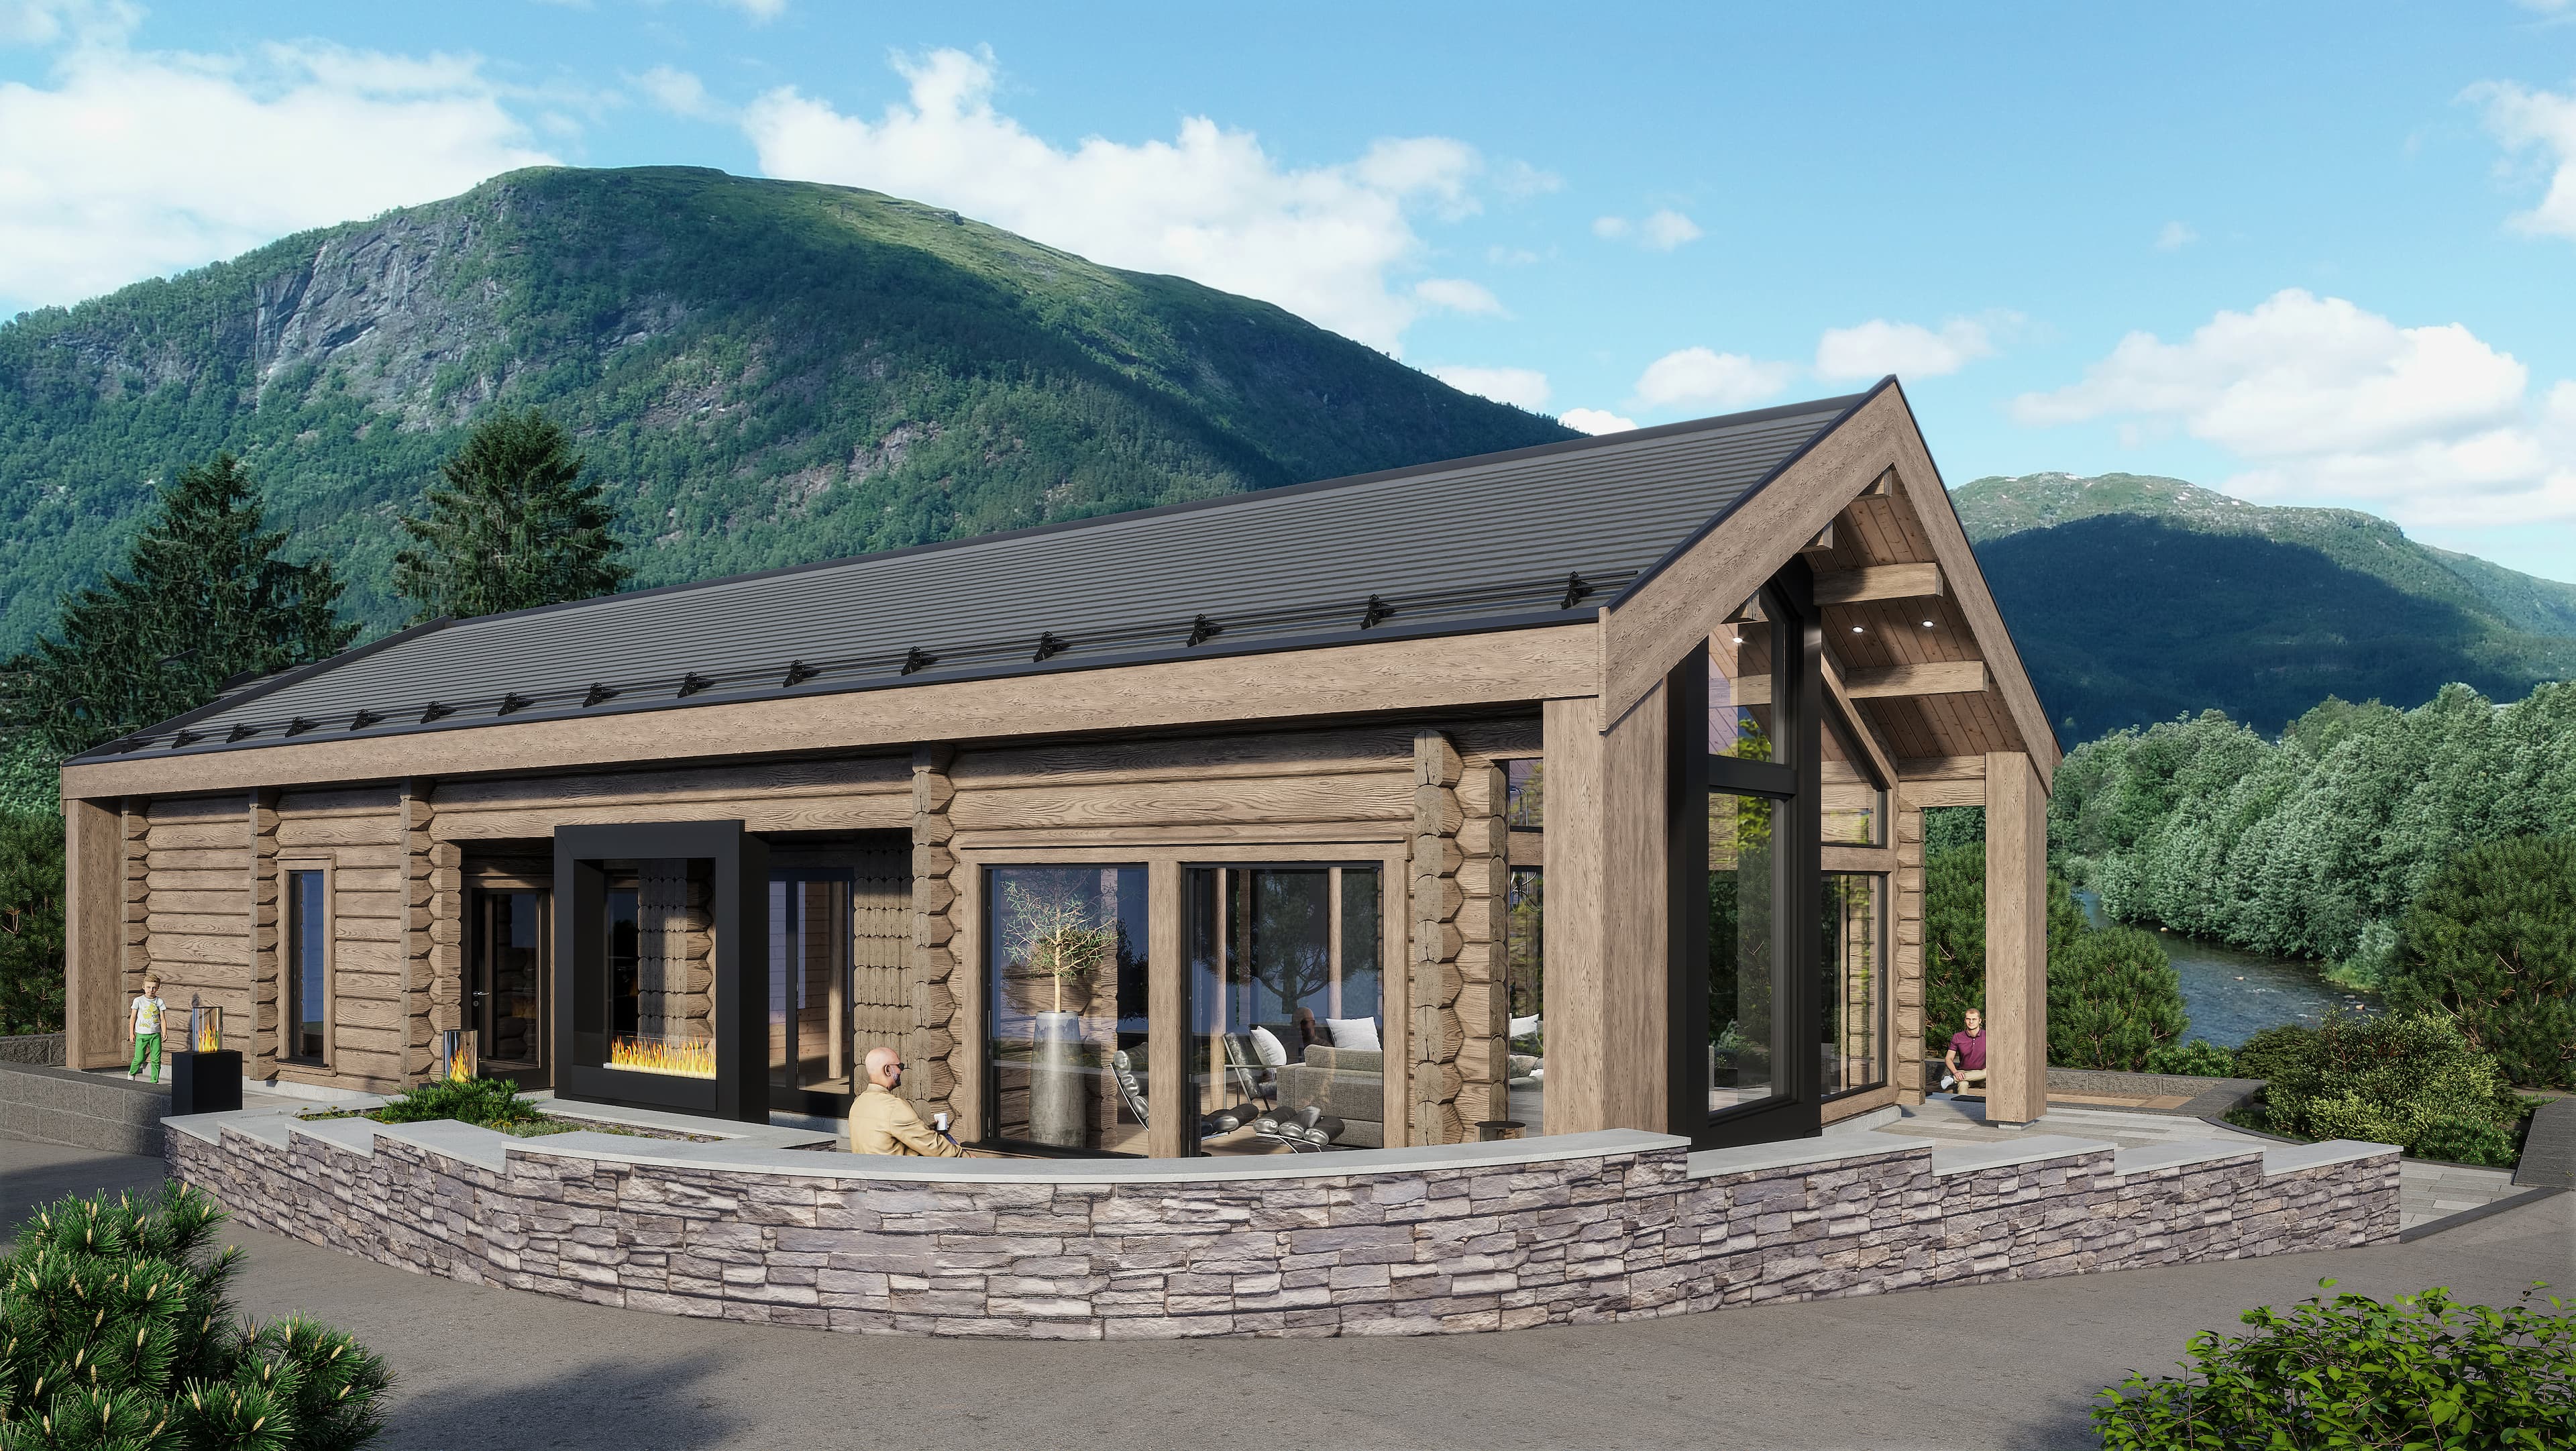 A render of a modern log house on a wooded hillside